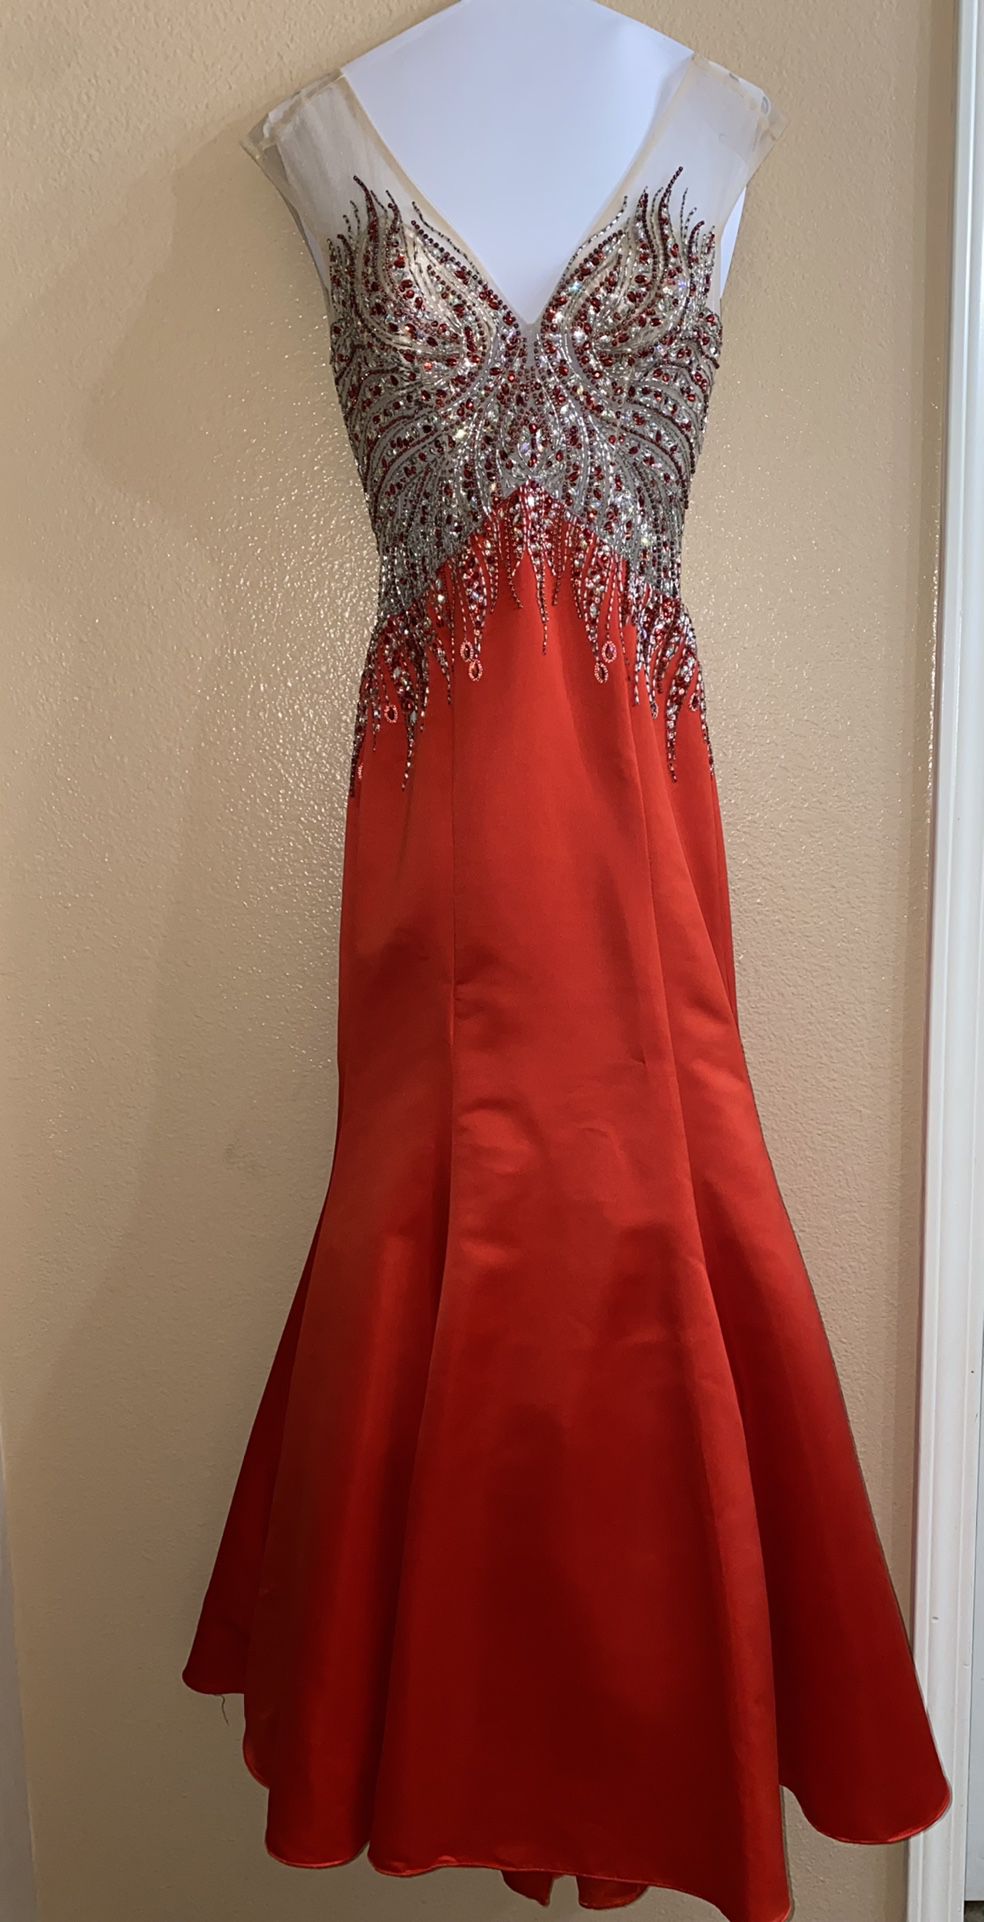 Red & Gold Dress